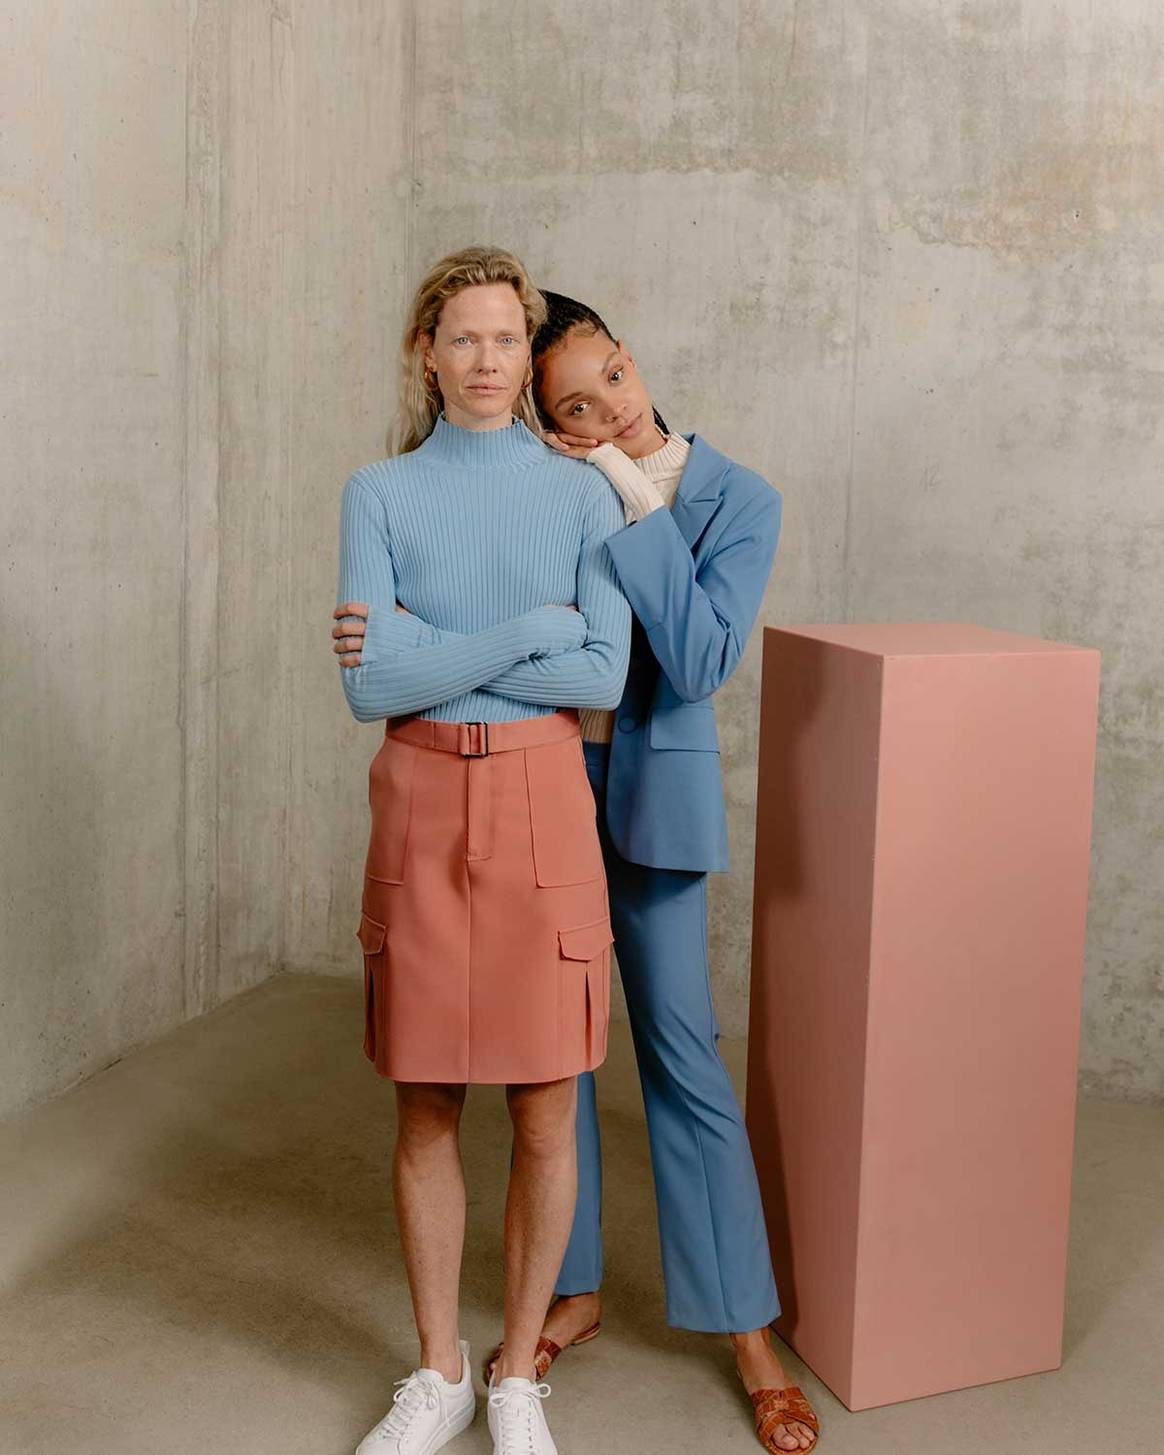 Zalando places emphasis on sustainability with new collection